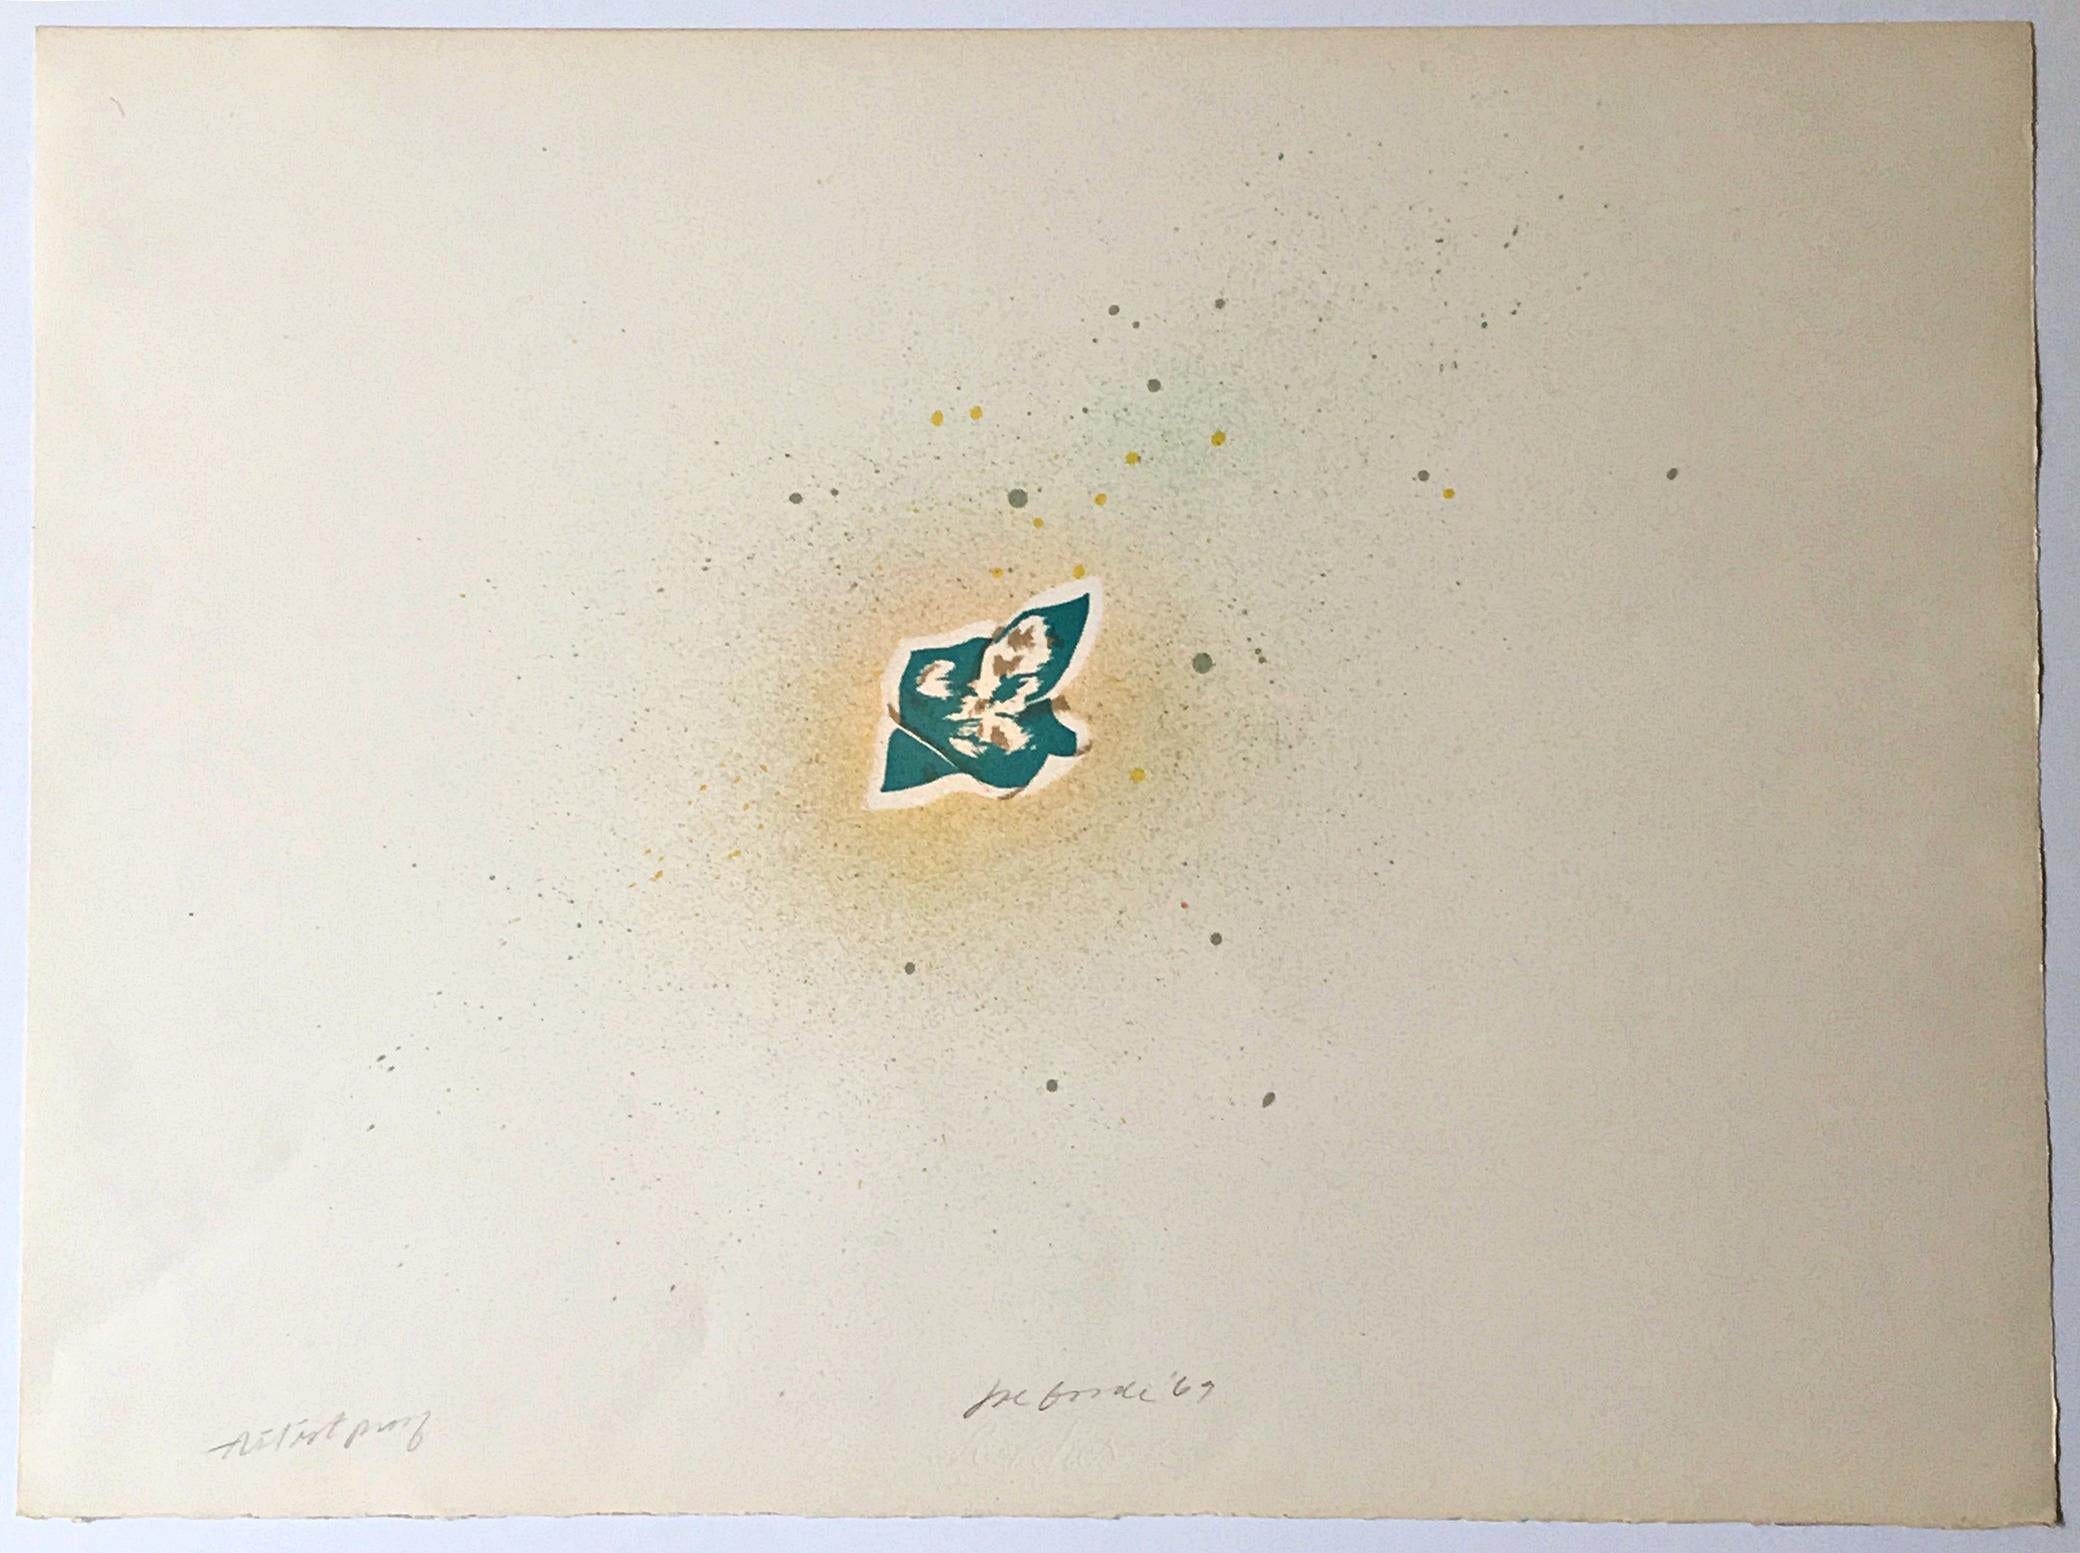 Joe Goode Abstract Print - Floating Cards (pencil signed Artist's Proof) 1960s lithograph